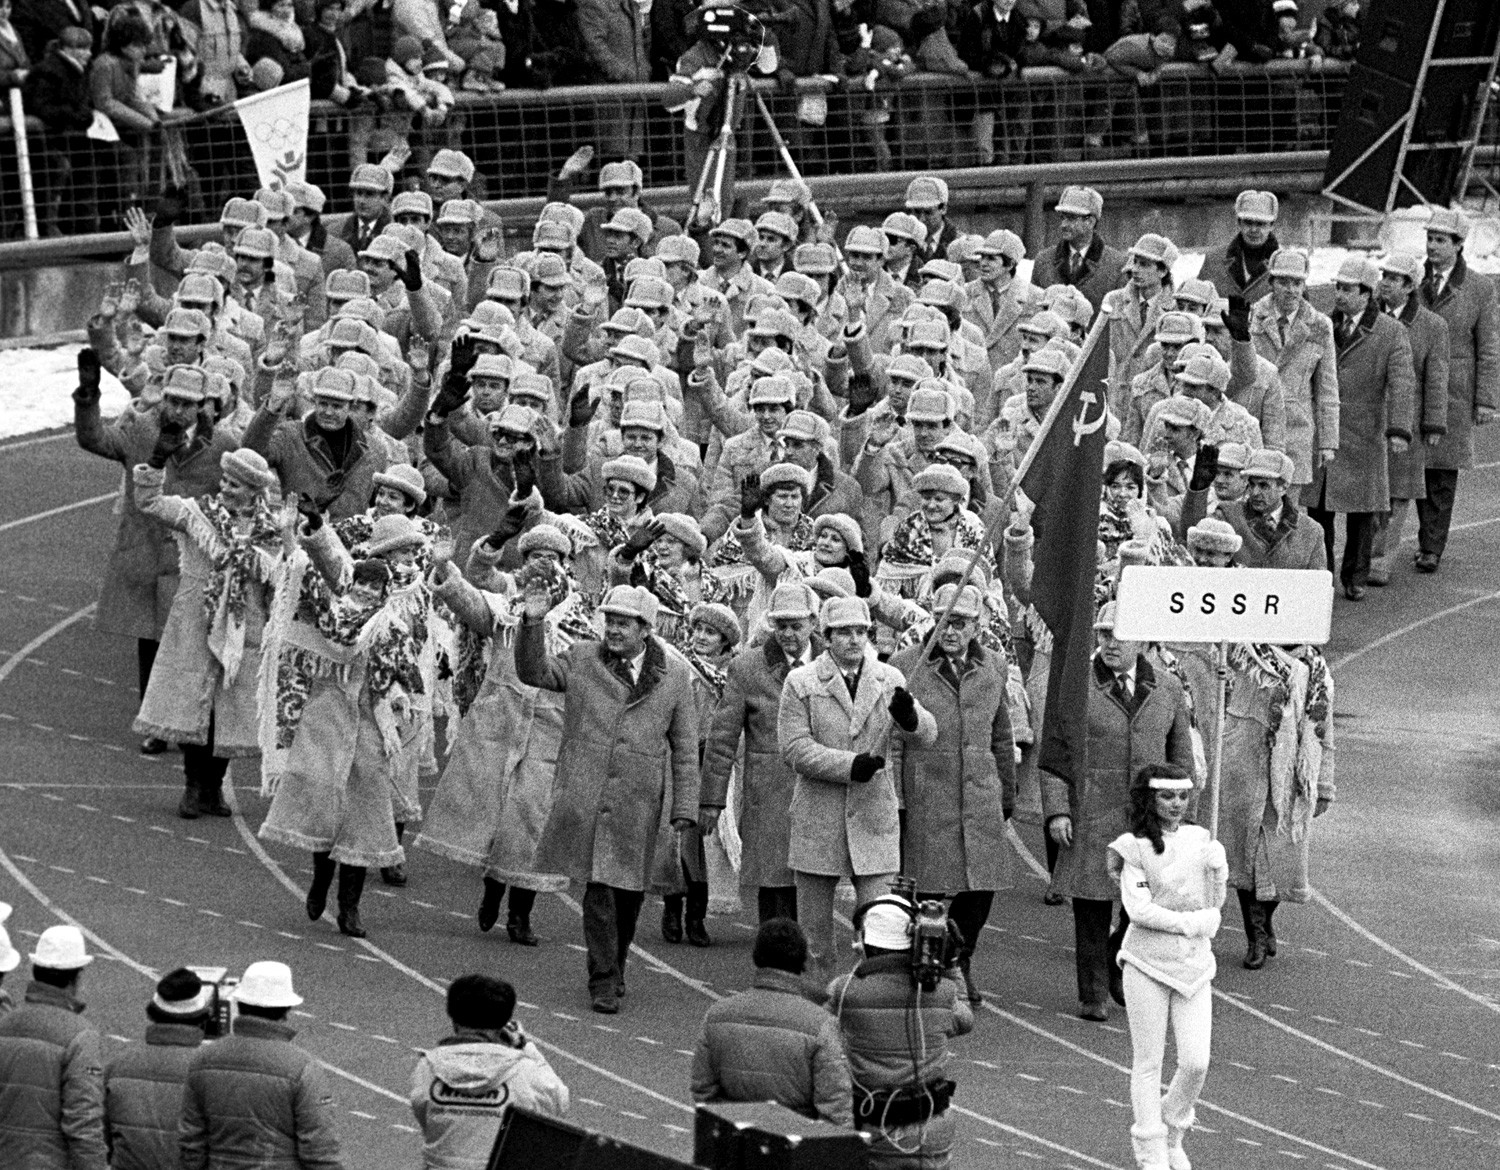 The Soviet team marches during the opening ceremony of the 1984 Winter Olympic Games in Sarajevo